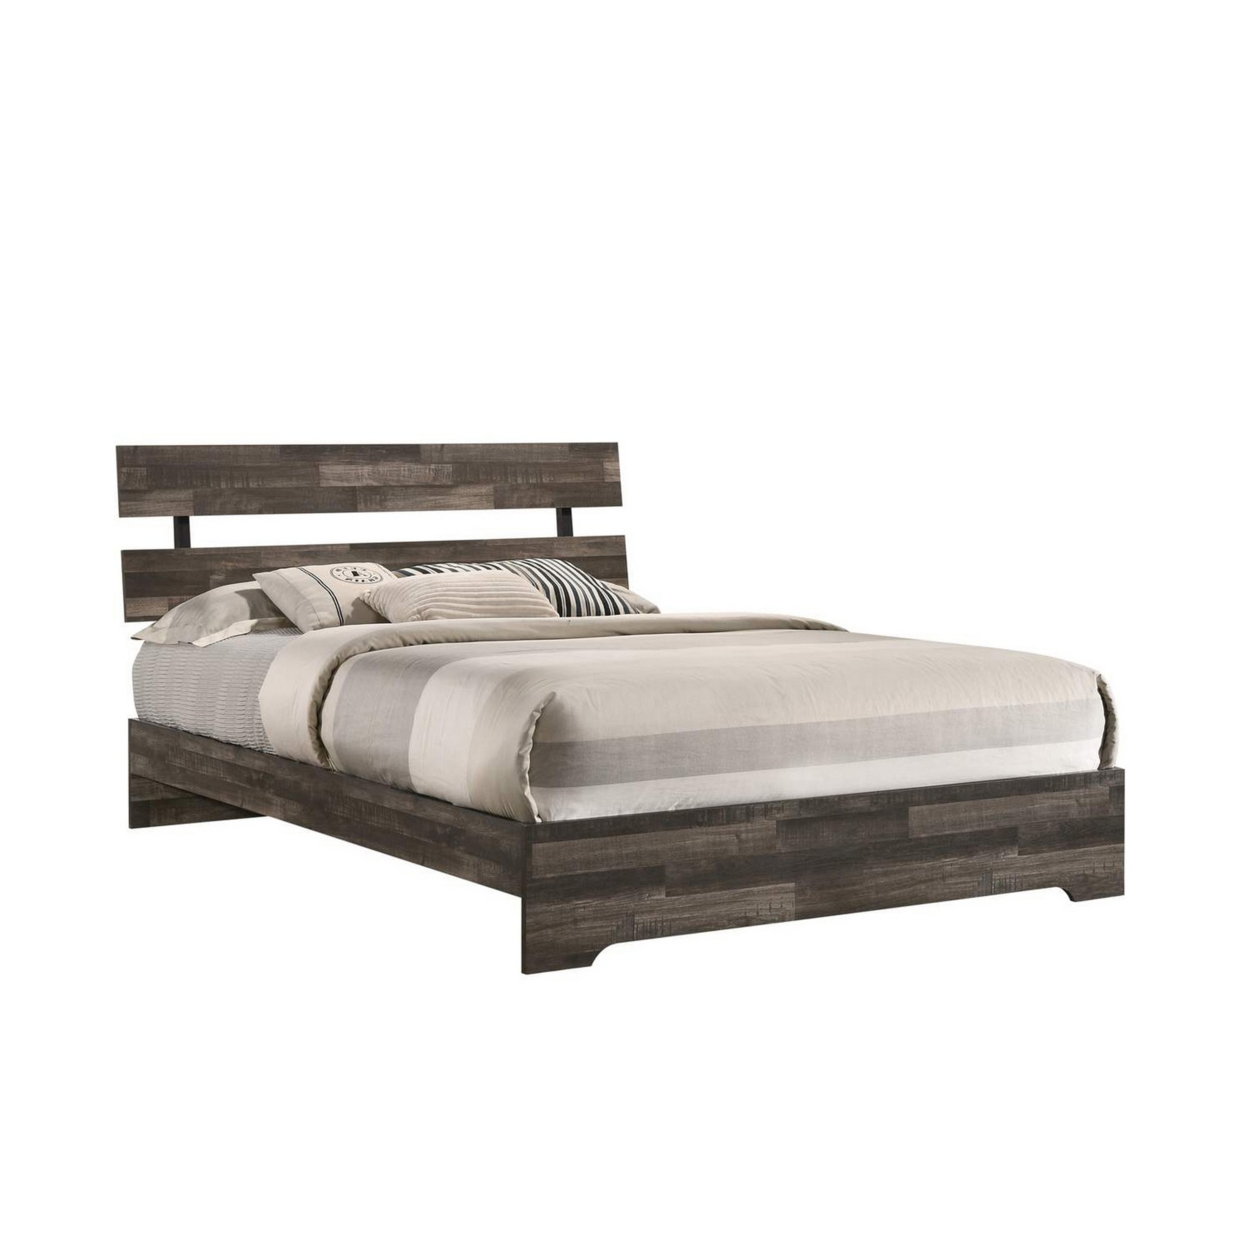 Twin Bed With Rustic Heavy Grain Details And Panel Design, Brown- Saltoro Sherpi